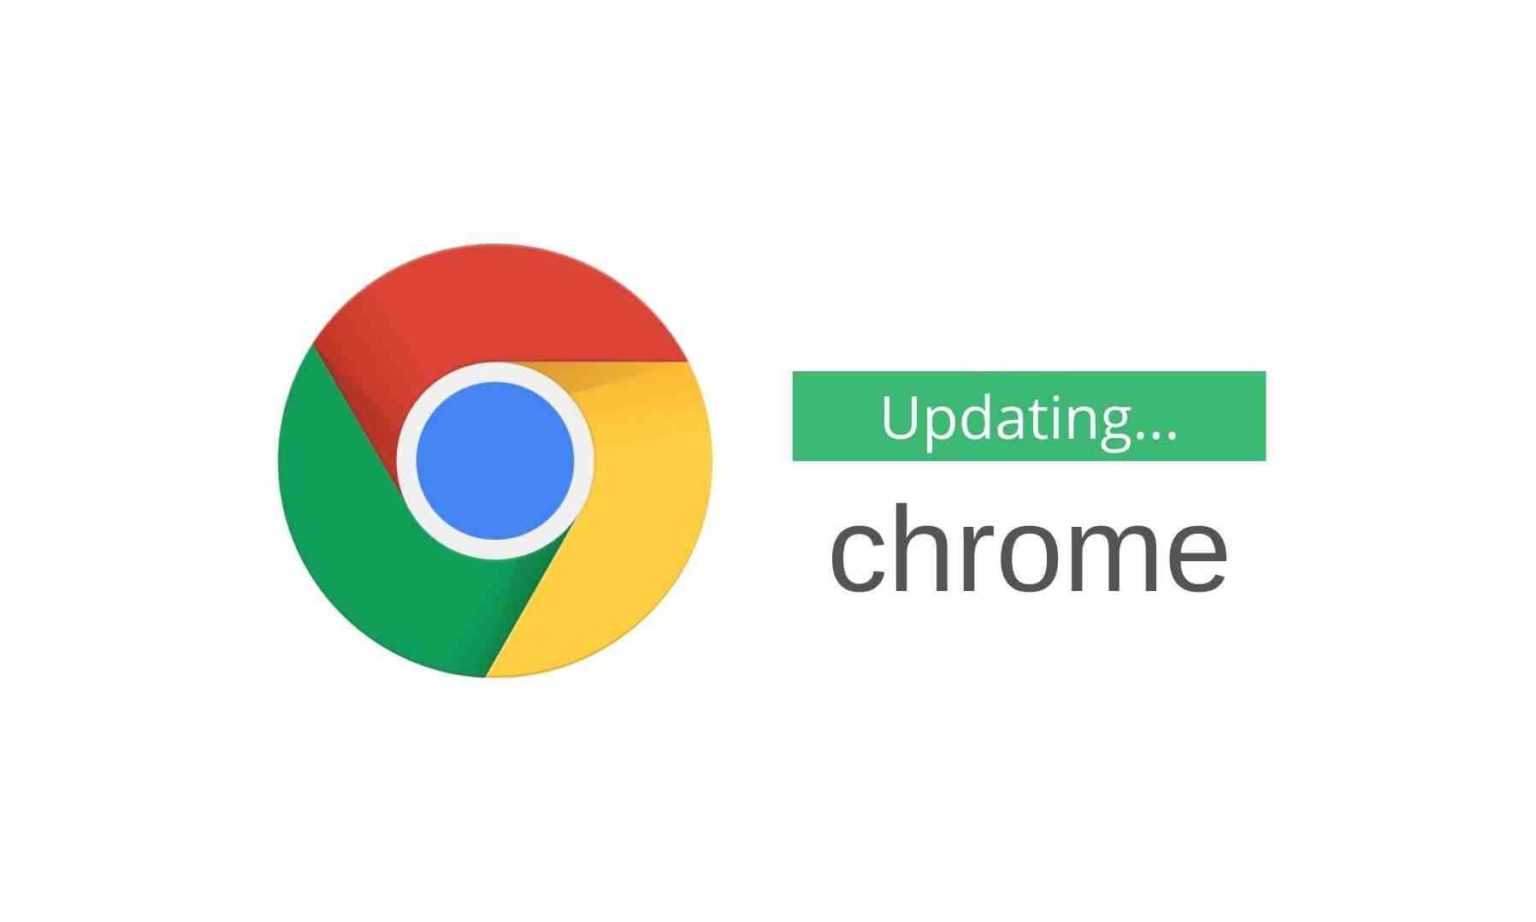 How to Update Chrome in 10 Seconds (StepbyStep Guide with Images)